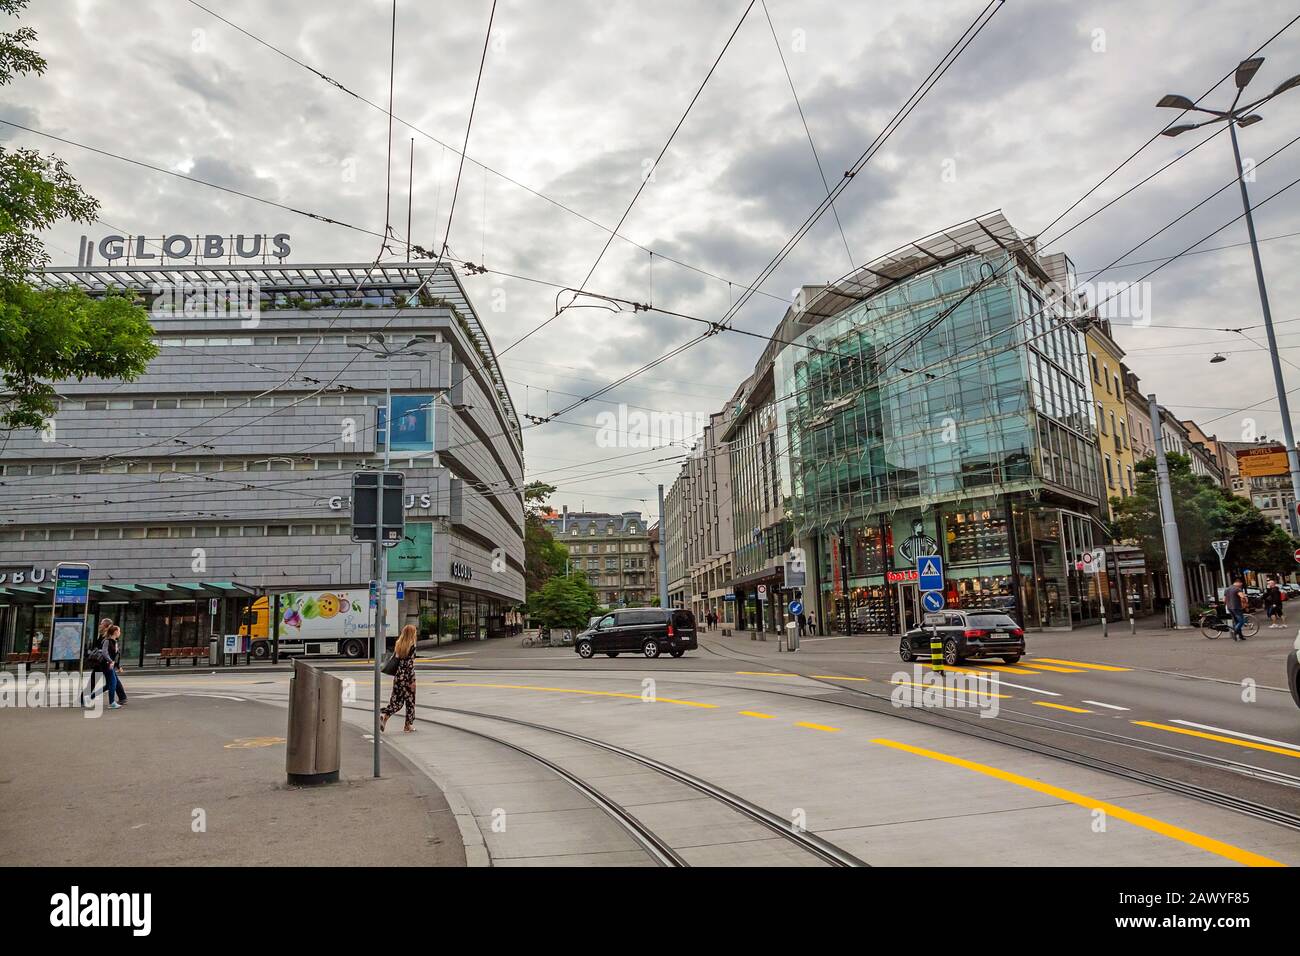 Zurich, Switzerland - June 10, 2017: Inner-city of Zurich with old and modern buildings. Tram rails in front. Stock Photo